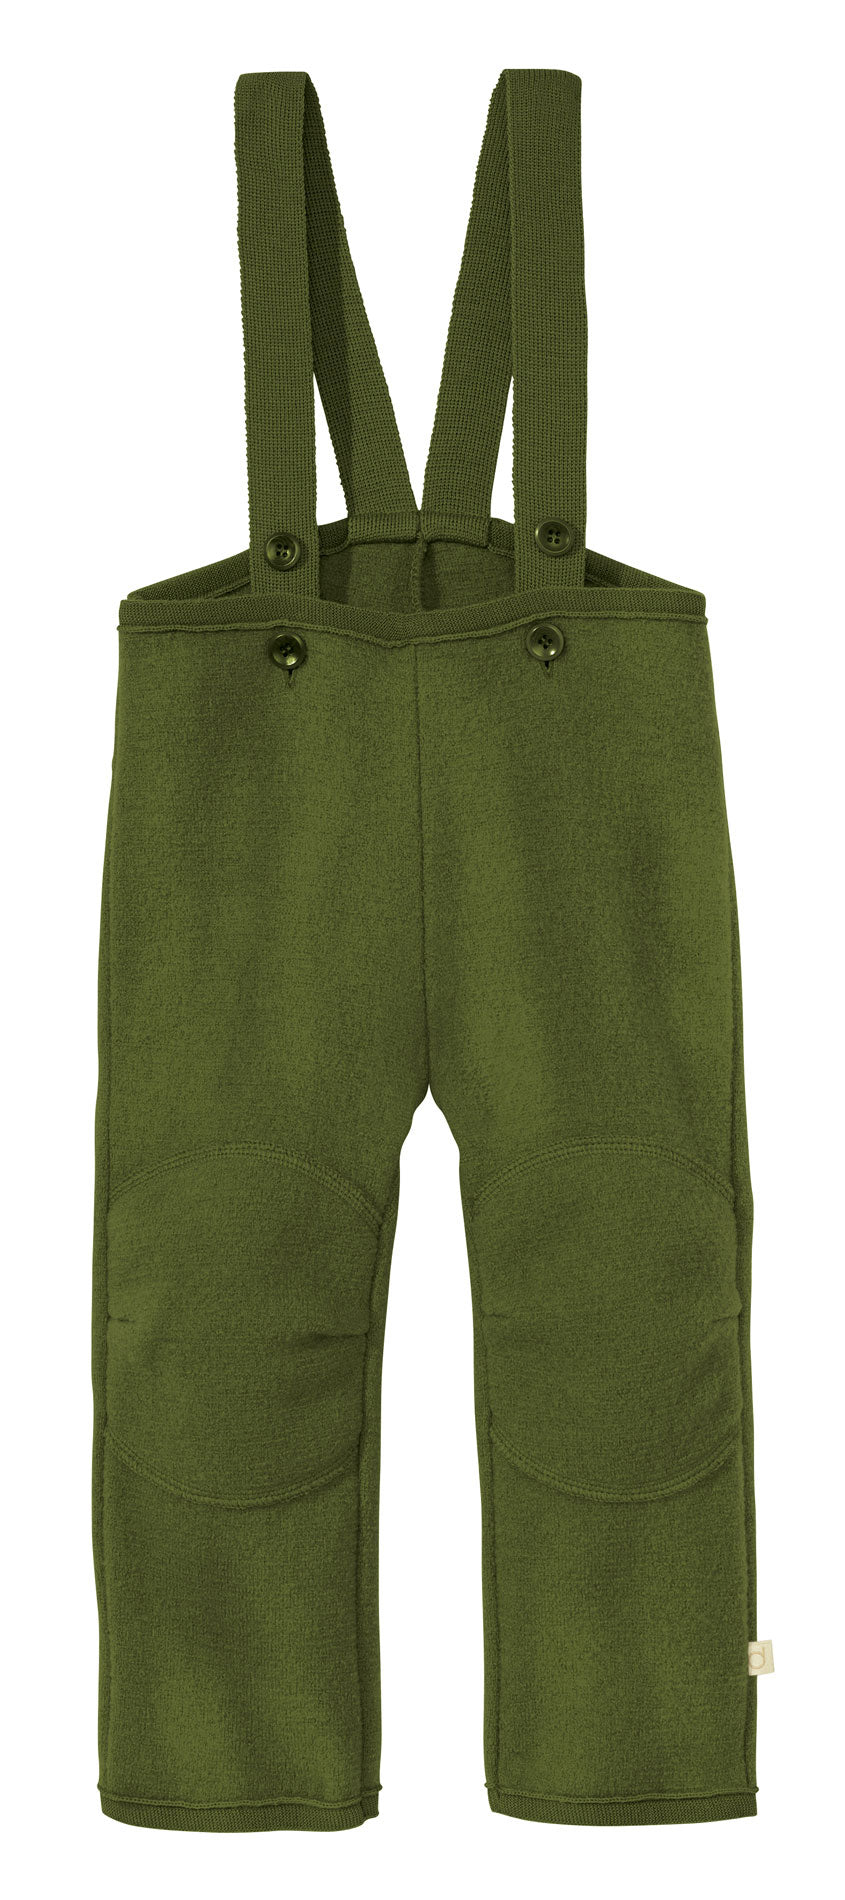 Olive Green Women's Pants for sale in Mission City, British